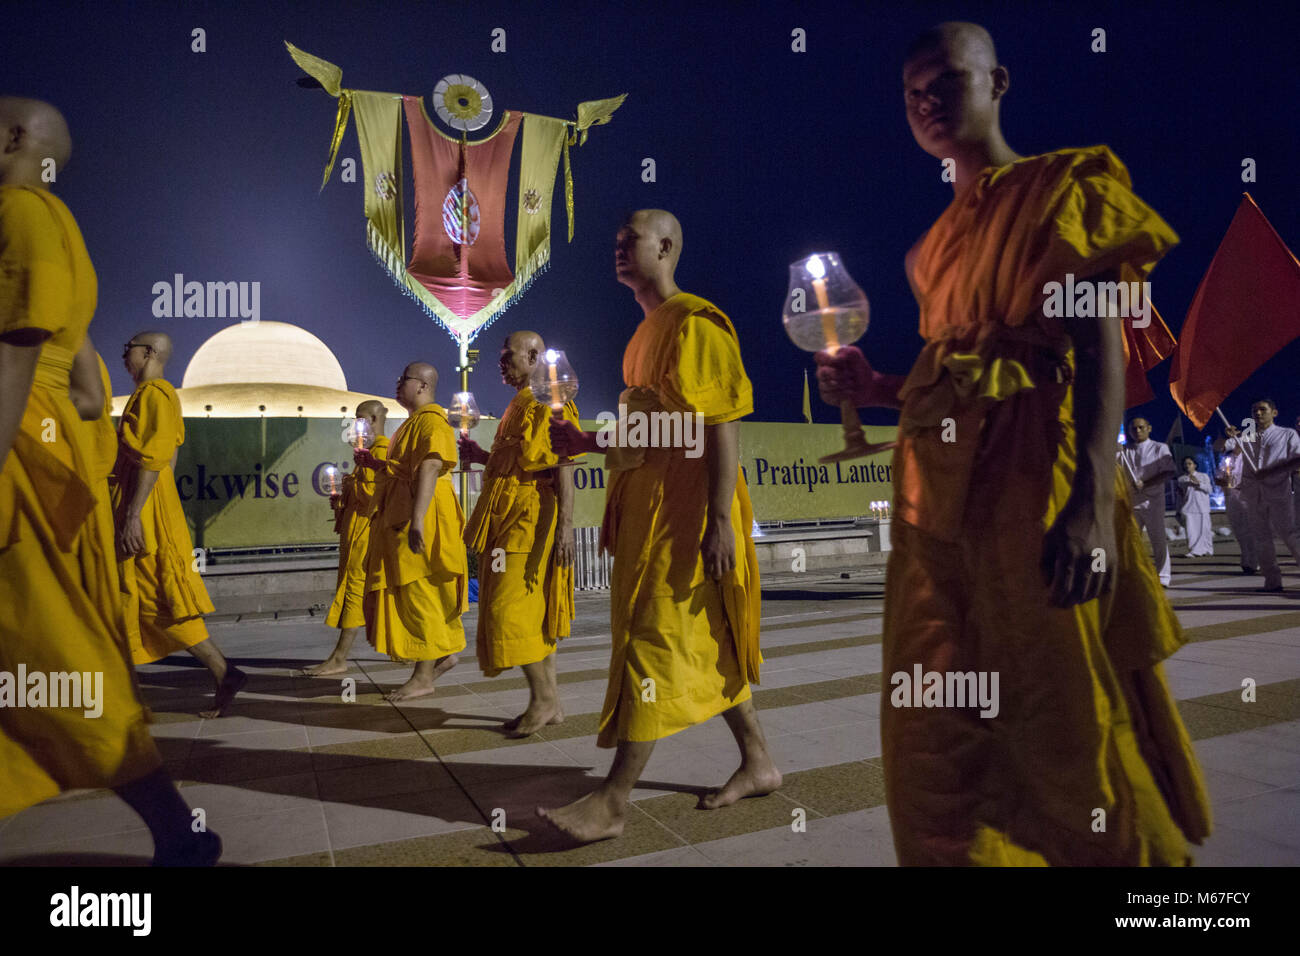 Bangkok, Pathum Thani, Thailand. 1st Mar, 2018. Monks seen walking around the temple while holding lanterns during the yearly Makha Bucha ceremony in the north of Bangkok.Buddhist devotees celebrate the annual festival of Makha Bucha, one of the most important day for buddhists around the world. More than a thousand monks and hundred of thousand devotees were gathering at Dhammakaya Temple in Bangkok to attend the lighting ceremony. Credit: 1C0A9540.jpg/SOPA Images/ZUMA Wire/Alamy Live News Stock Photo